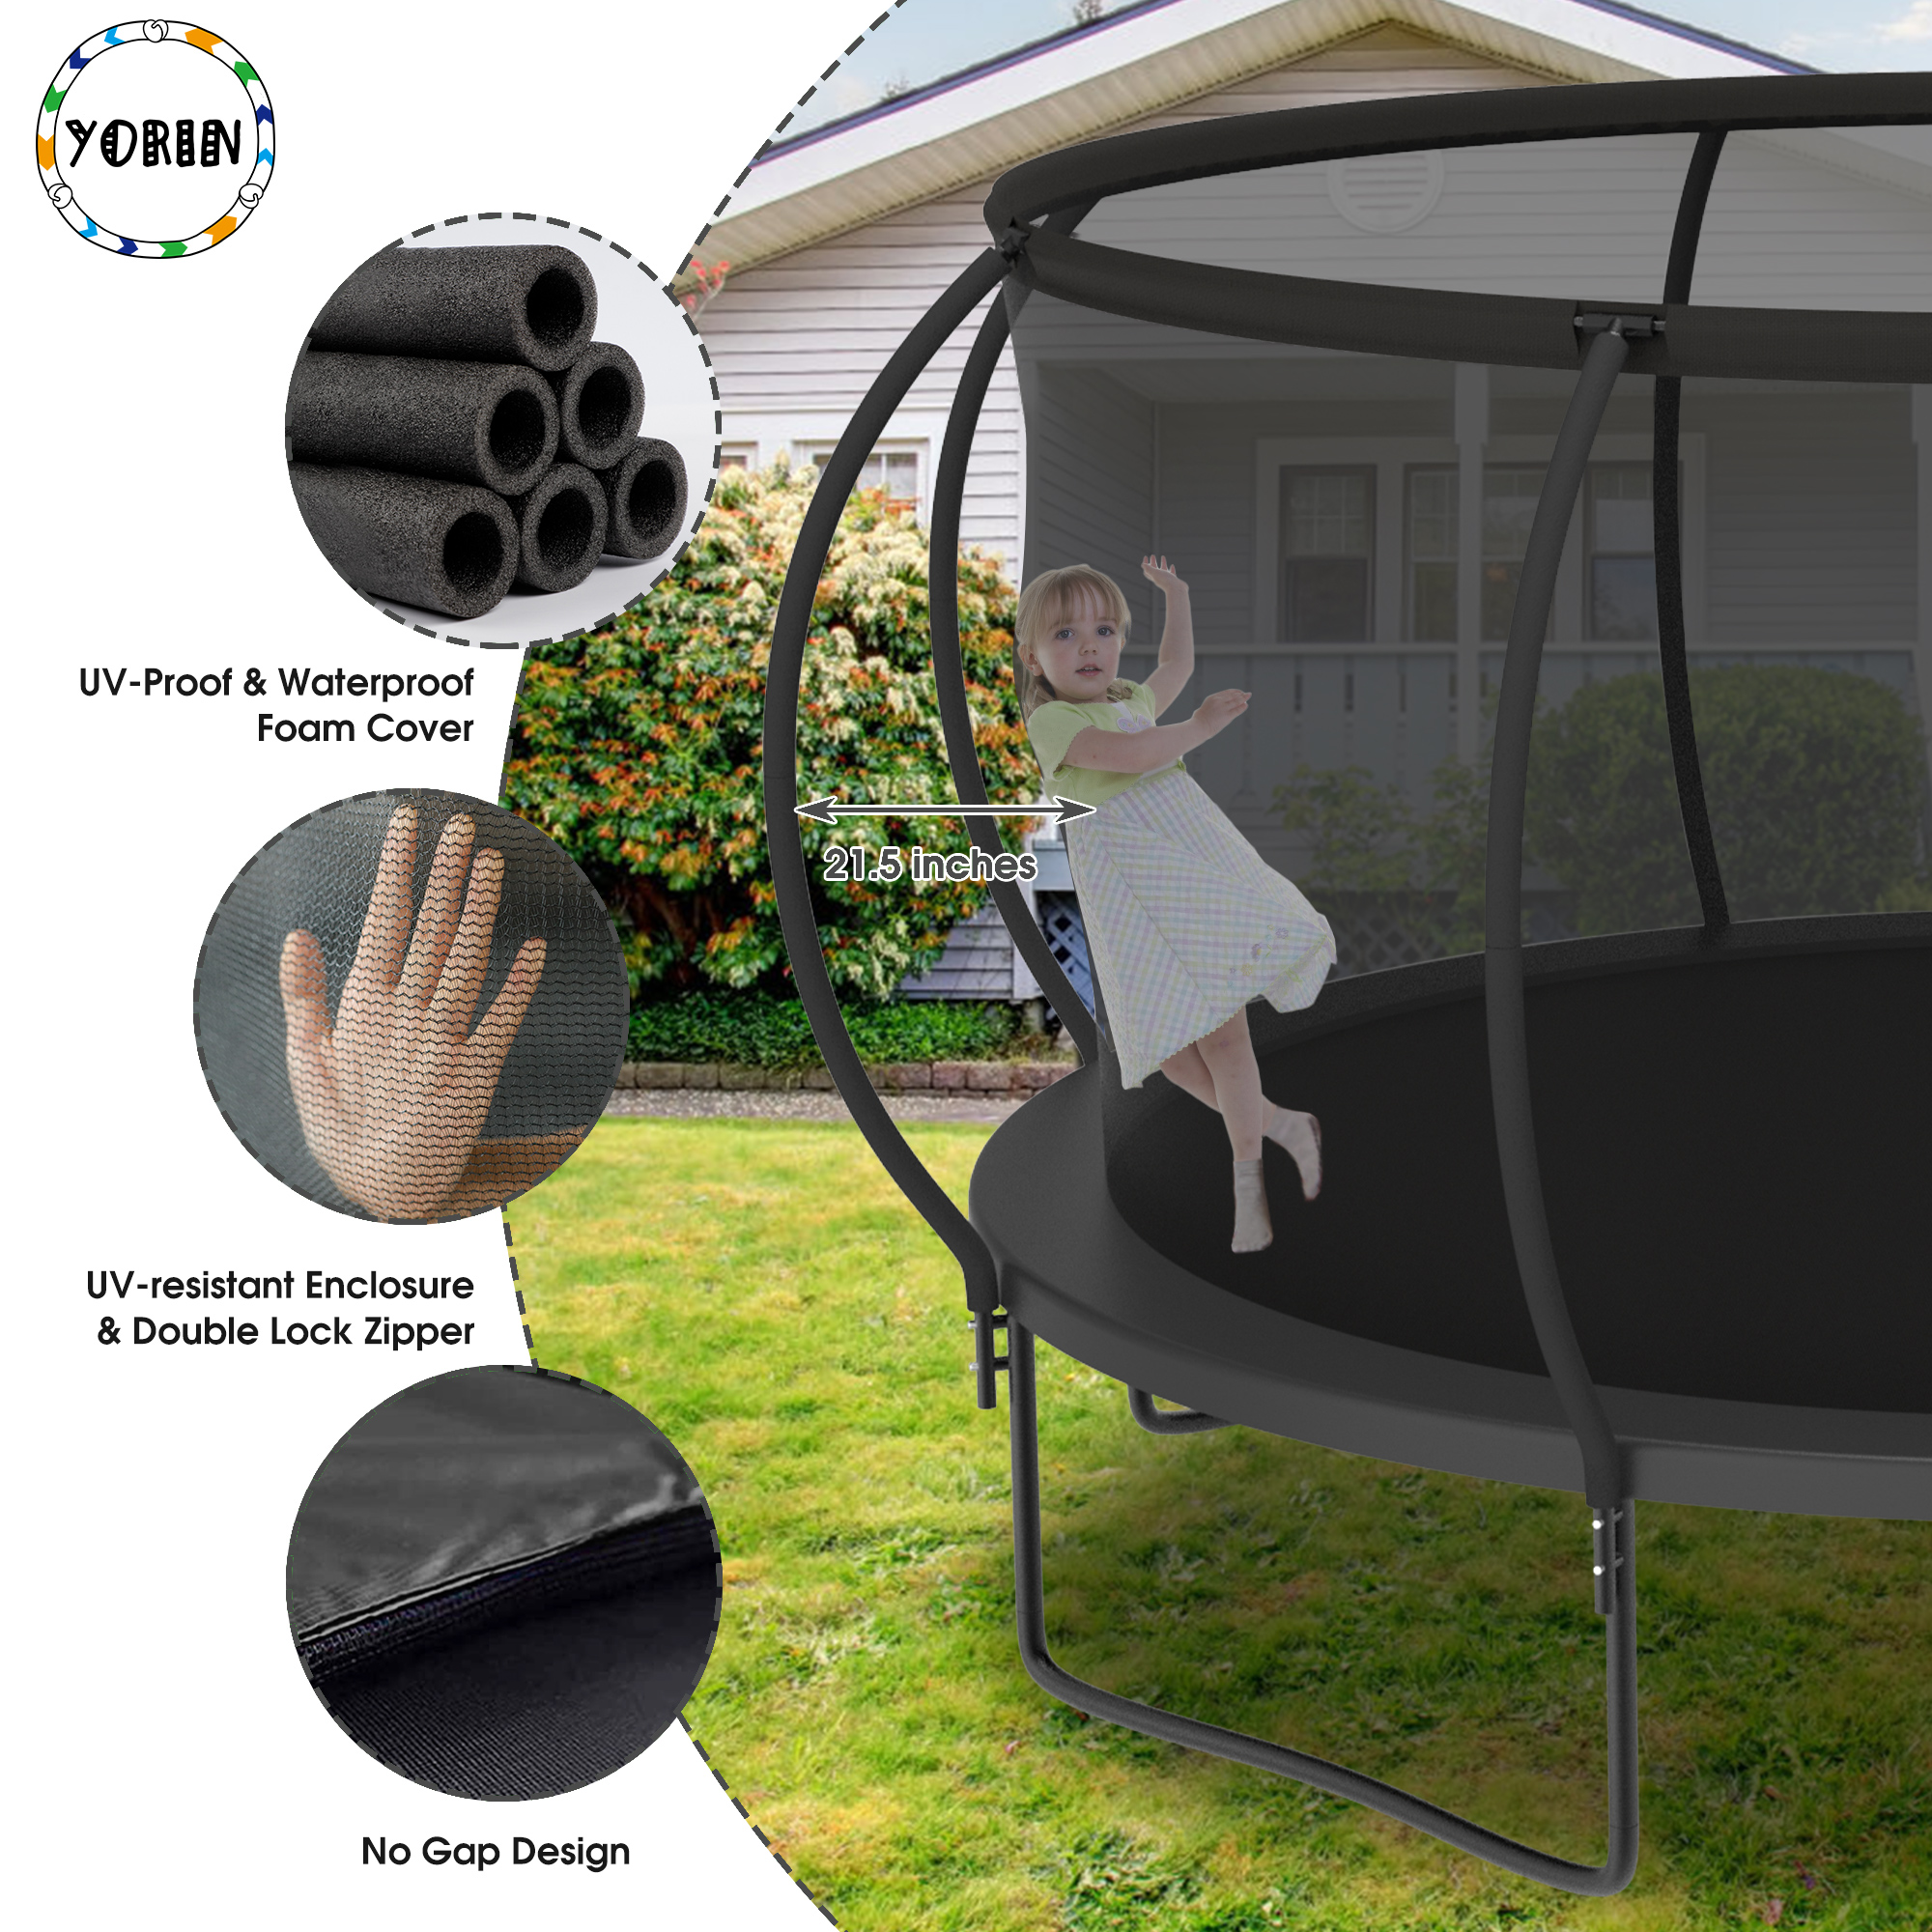 YORIN Trampoline for 7-8 Kids, 14 FT Trampoline with Enclosure Net for ...